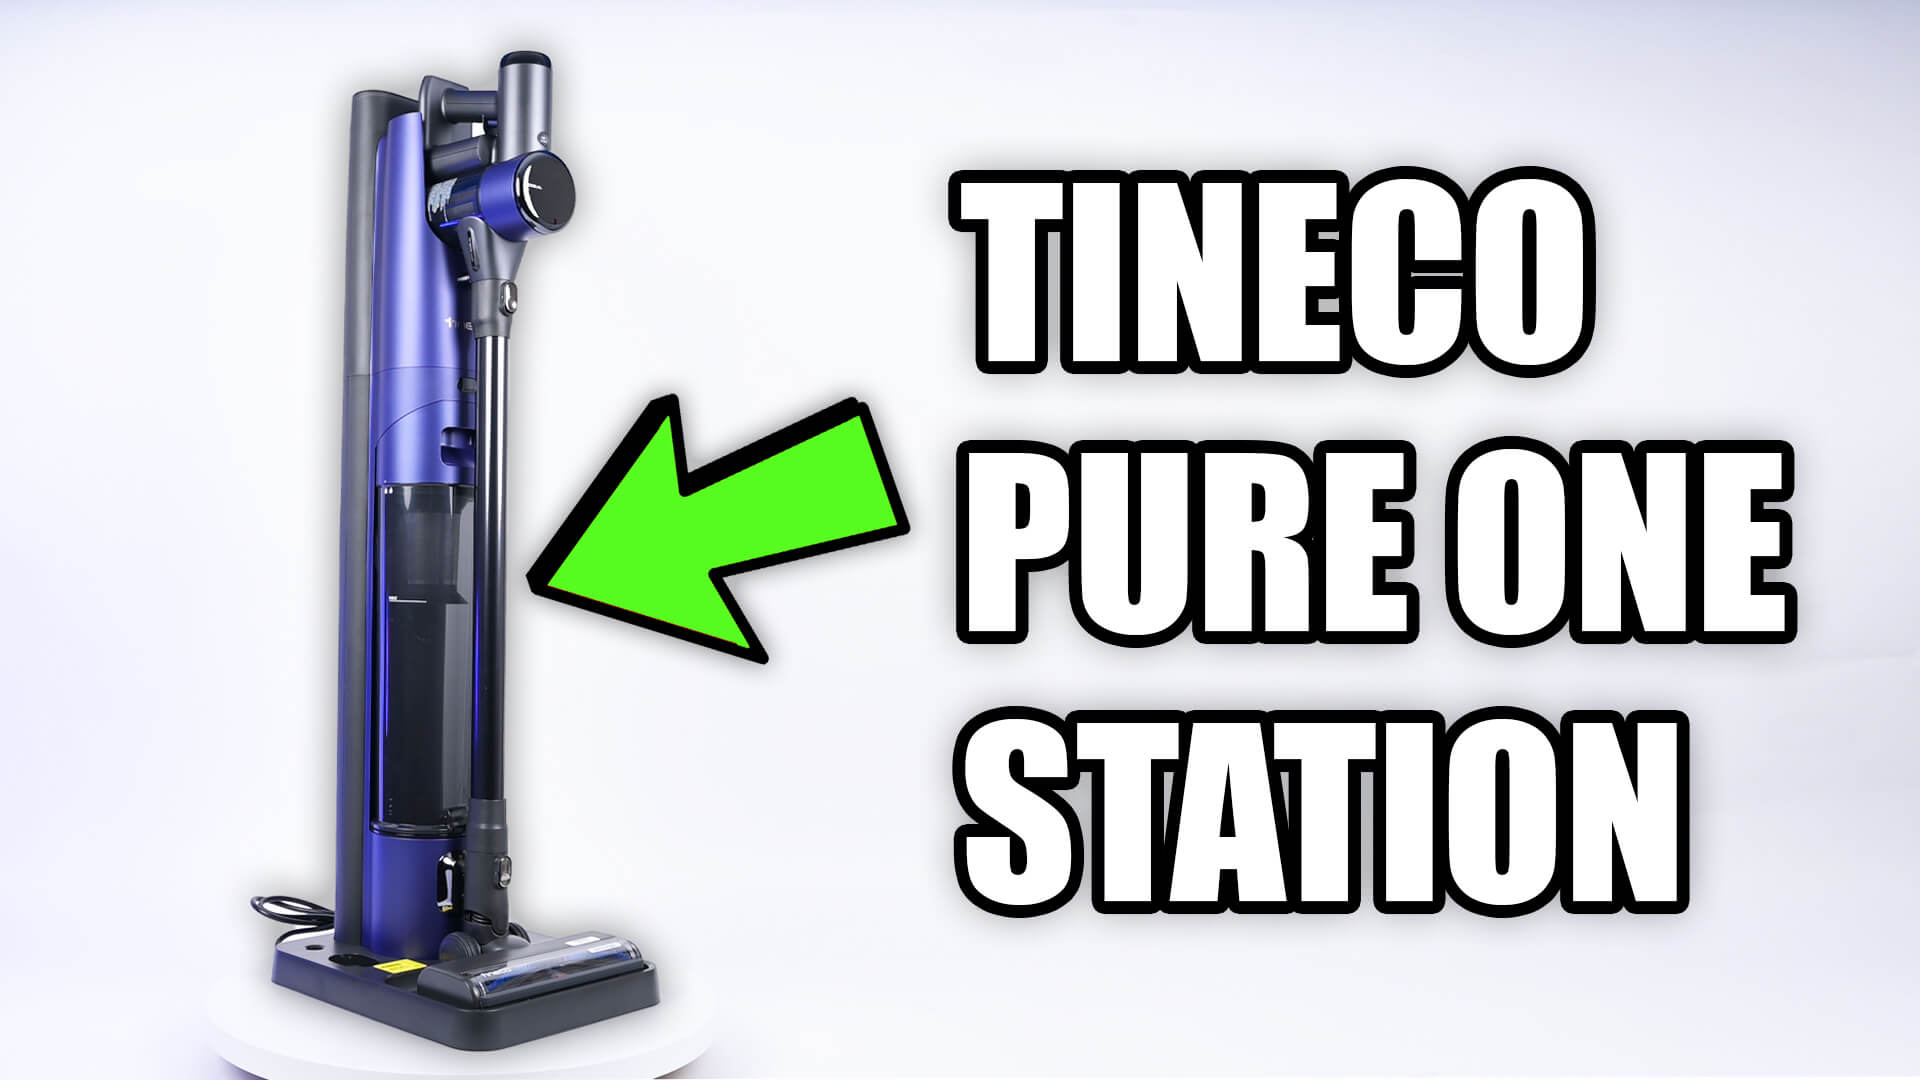 Tineco Pure One Station Review